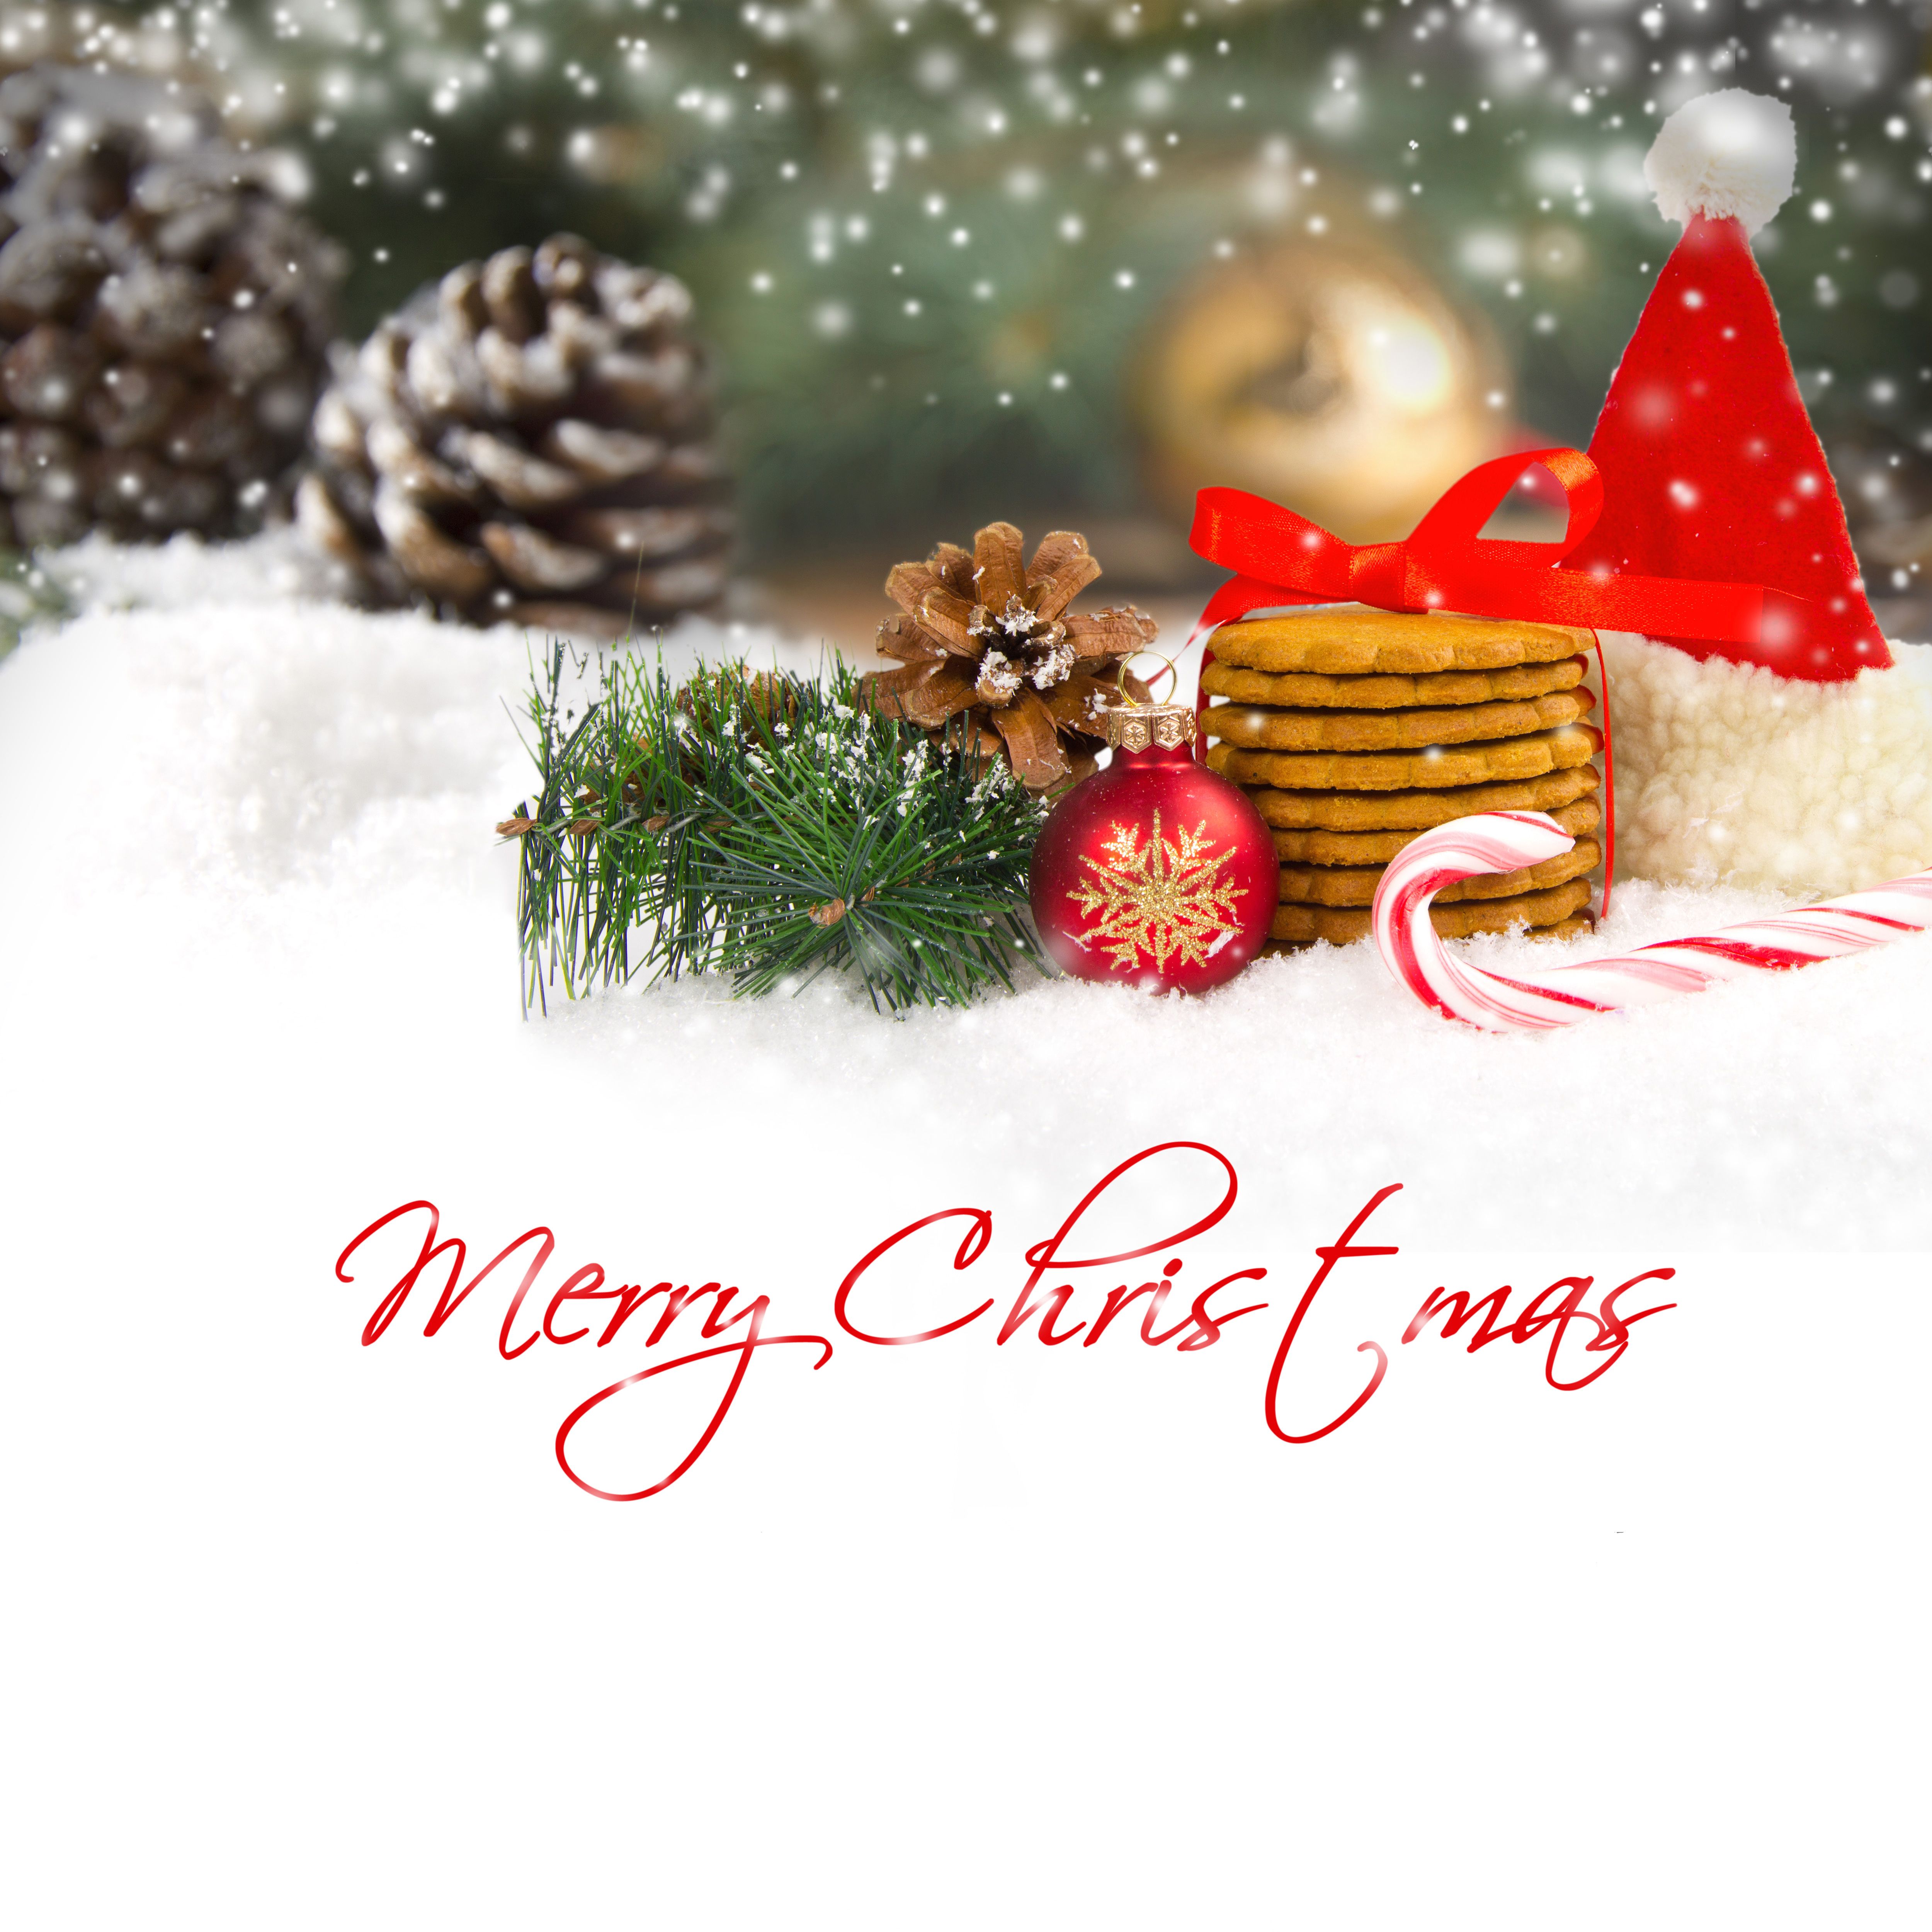 Merry Christmas Background With Pine Cones Quality Image And Transparent PNG Free Clipart